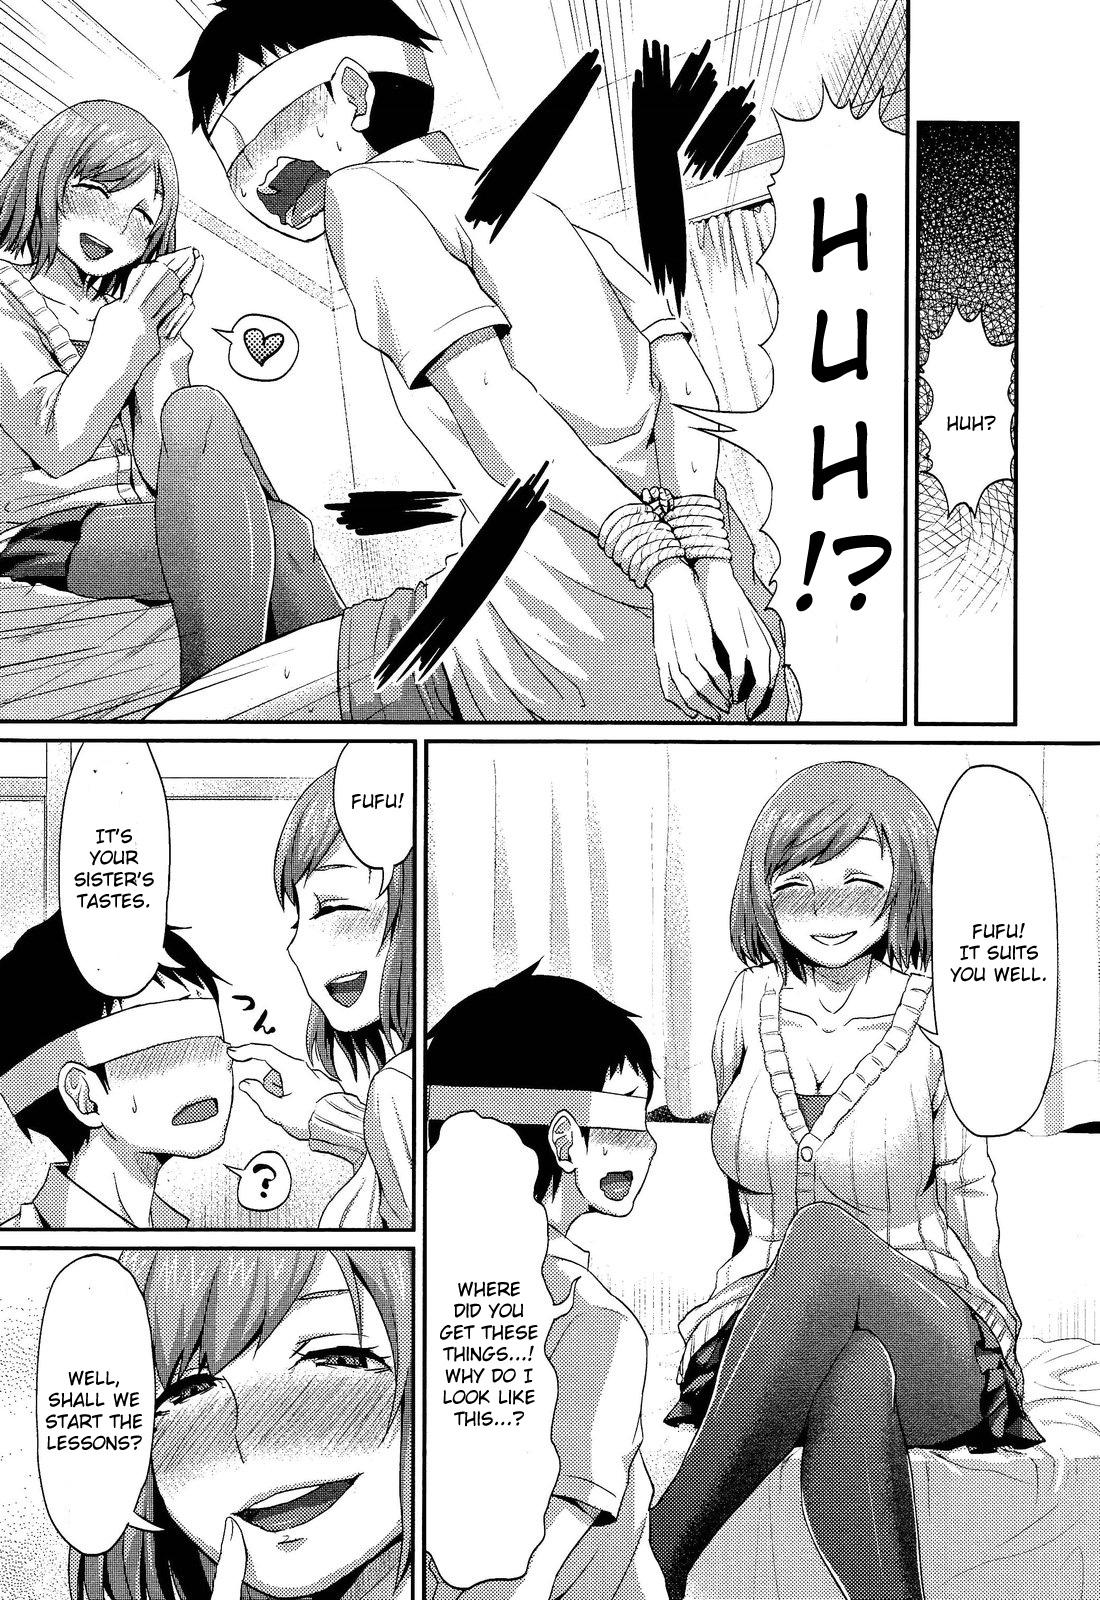 Blow Job Contest [Shinooka Homare] Onee-chan no SM Kouza | Onee-chan's S&M Lecture (Girls forM Vol. 02) [English] [CGrascal] Ethnic - Page 5